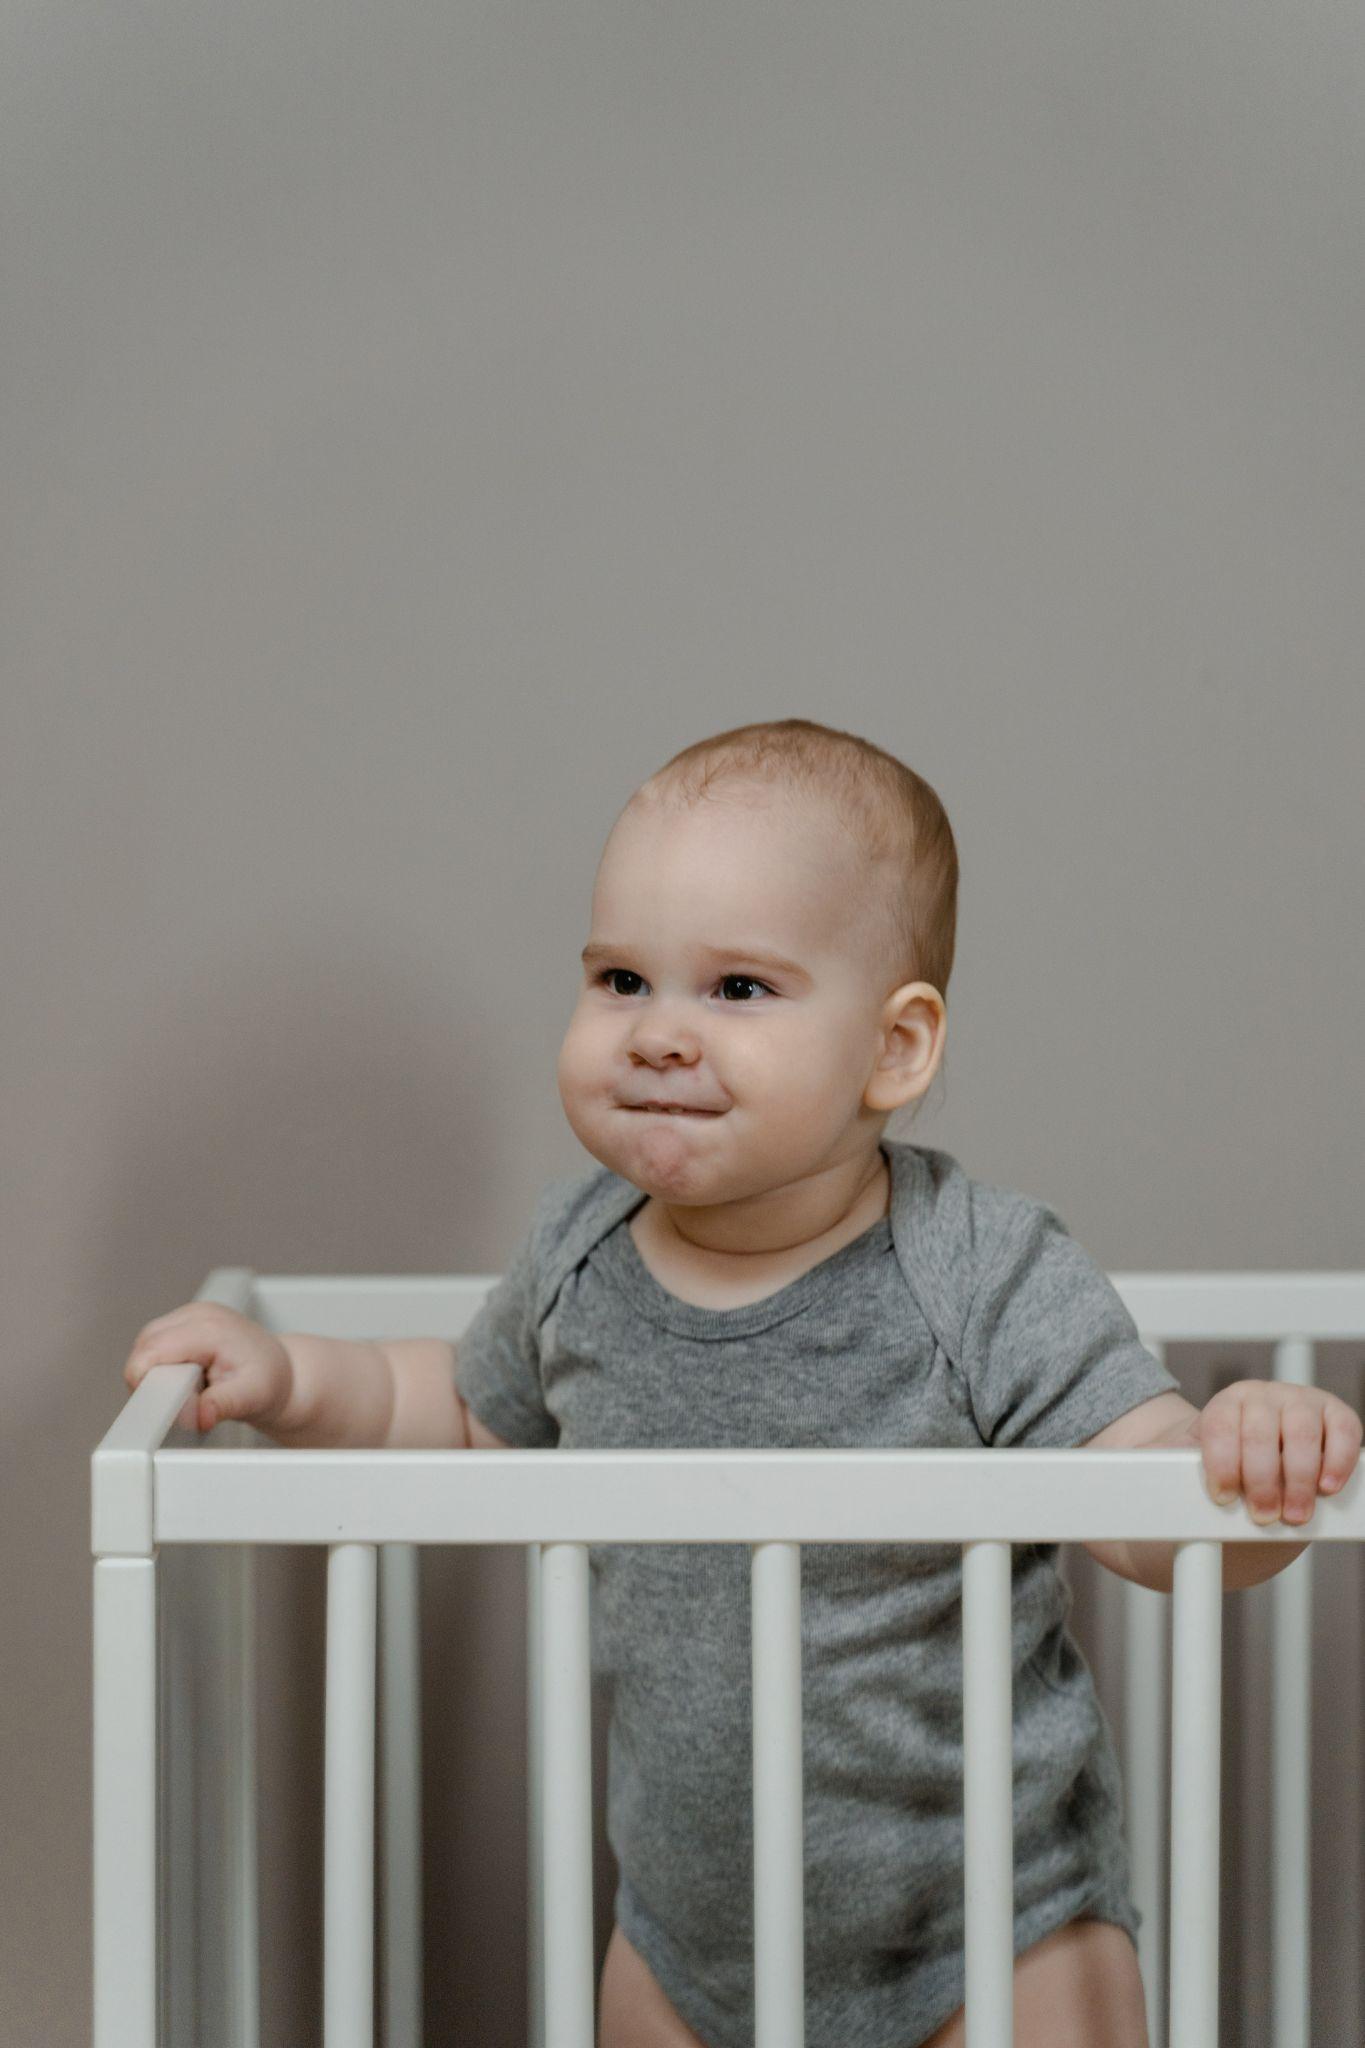 Boy making faces in his crib - Toddler Climbing Out of Crib - Baby Journey